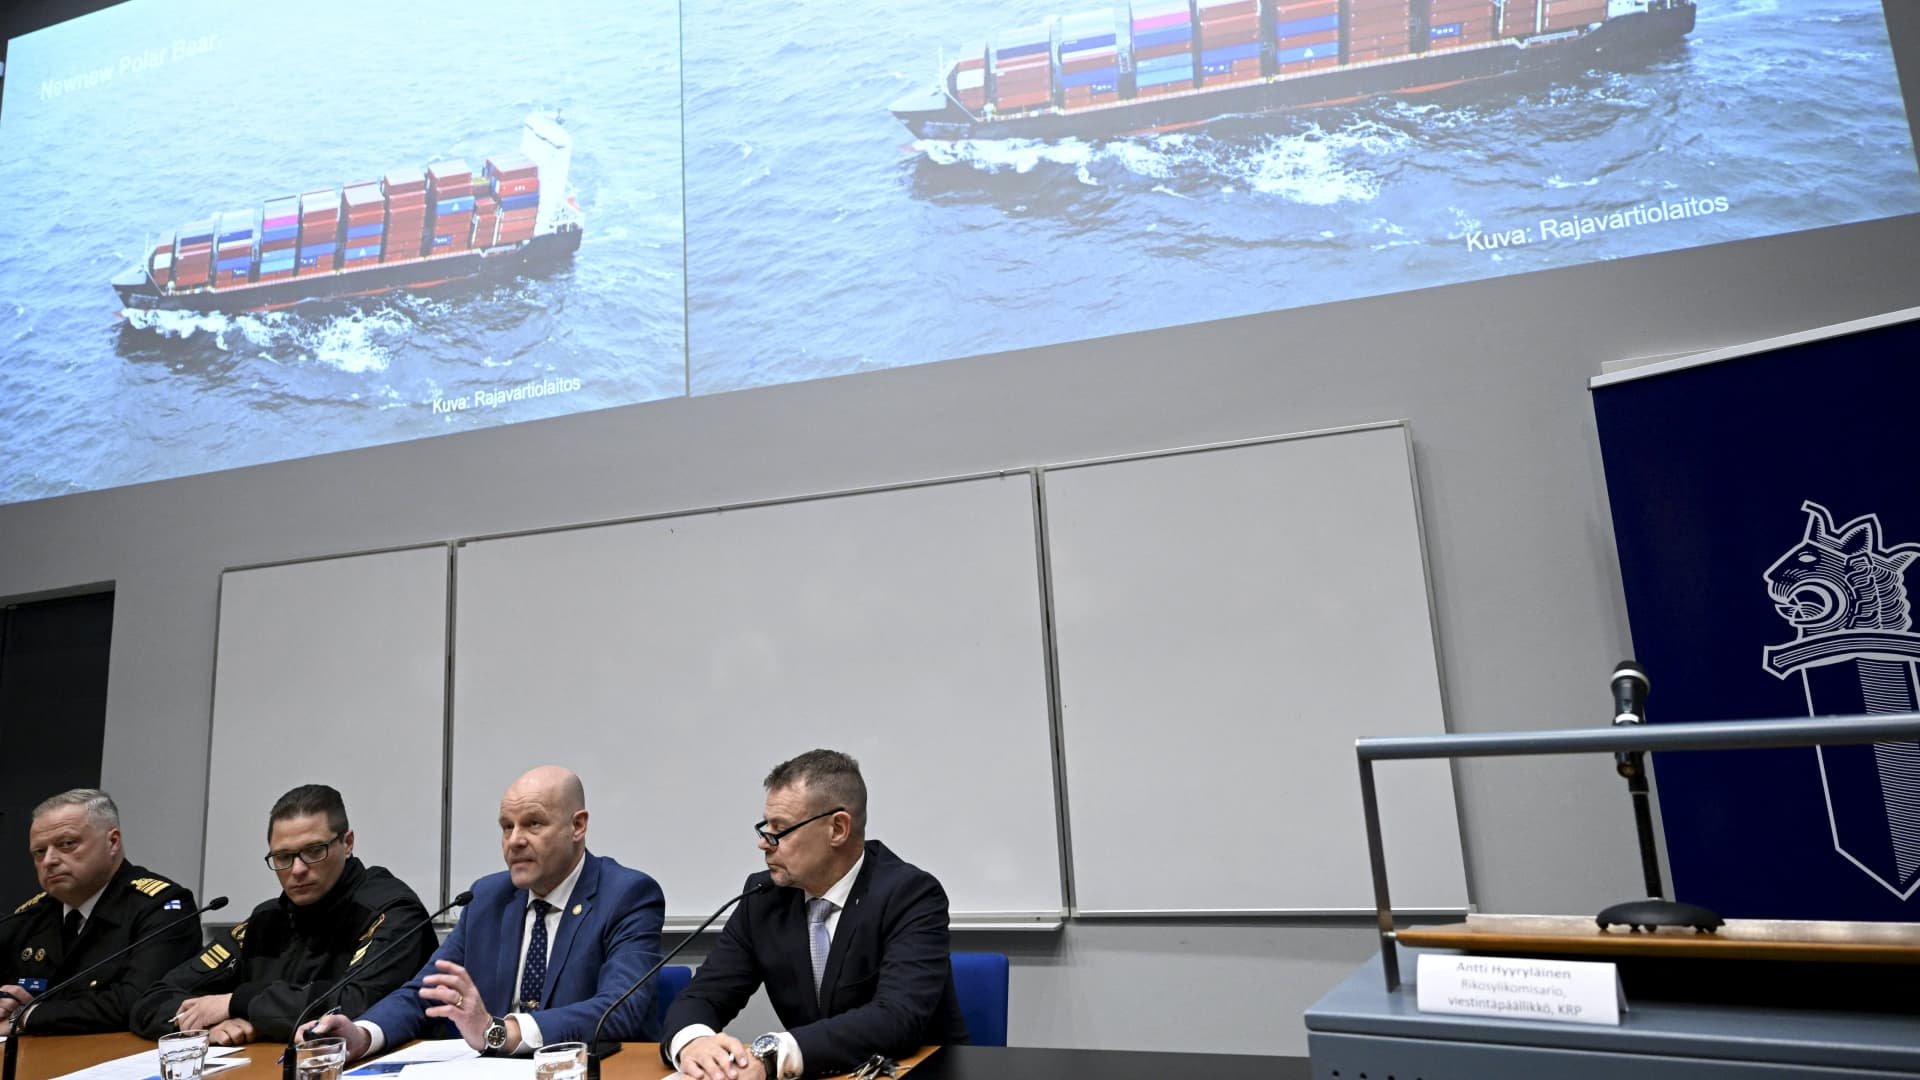 The commanding officer of the Finnish Navy Toni Joutsia (L to R), lieutenant commander of the Finnish Border Guard Markus Paljakka, the detective inspector of the National Bureau of Investigation Risto Lohi and the Chief of National Bureau of Investigation Robin Lardot attend a joint press conference of the investigation of the possible attack on the Balticconnector gas line on October 8, 2023 between Finland and Estonia at the headquarters of the National Bureau of Investigation in Vantaa, Finland on October 24, 2023. The screen shows Finnish Border Guard's photo of a Hong Kong -registered cargo ship 'Newnew Polar Bear', which was spotted moving close to the Balticconnector gas line.Finnish police said a Chinese ship was the focus of their investigation into suspected sabotage of the Balticconnector pipeline. (Photo by Heikki Saukkomaa / Lehtikuva / AFP) / Finland OUT (Photo by HEIKKI SAUKKOMAA/Lehtikuva/AFP via Getty Images)